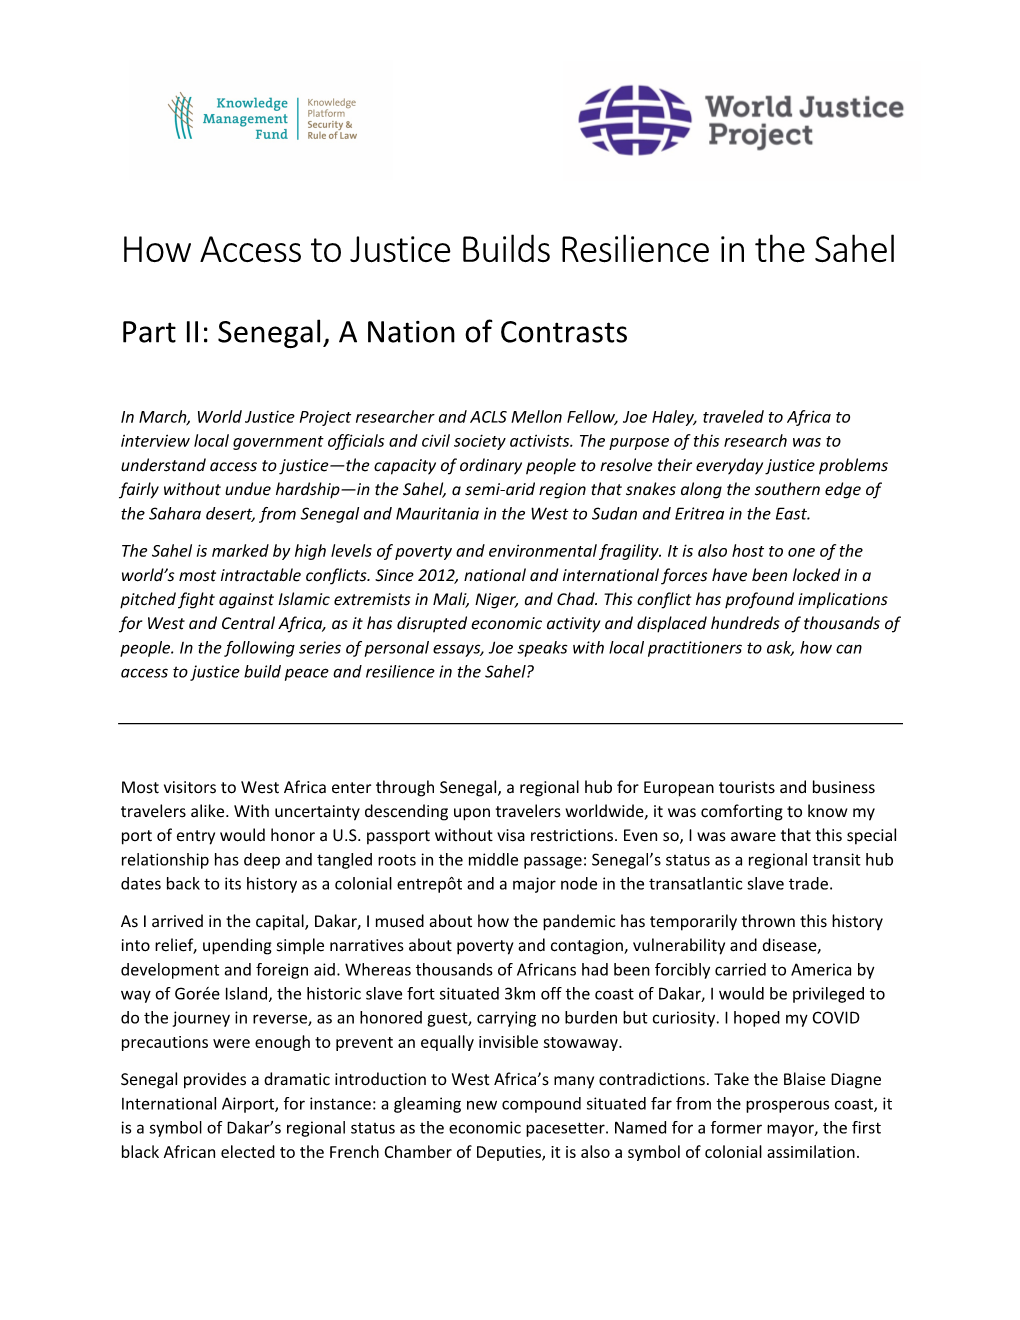 How Access to Justice Builds Resilience in the Sahel